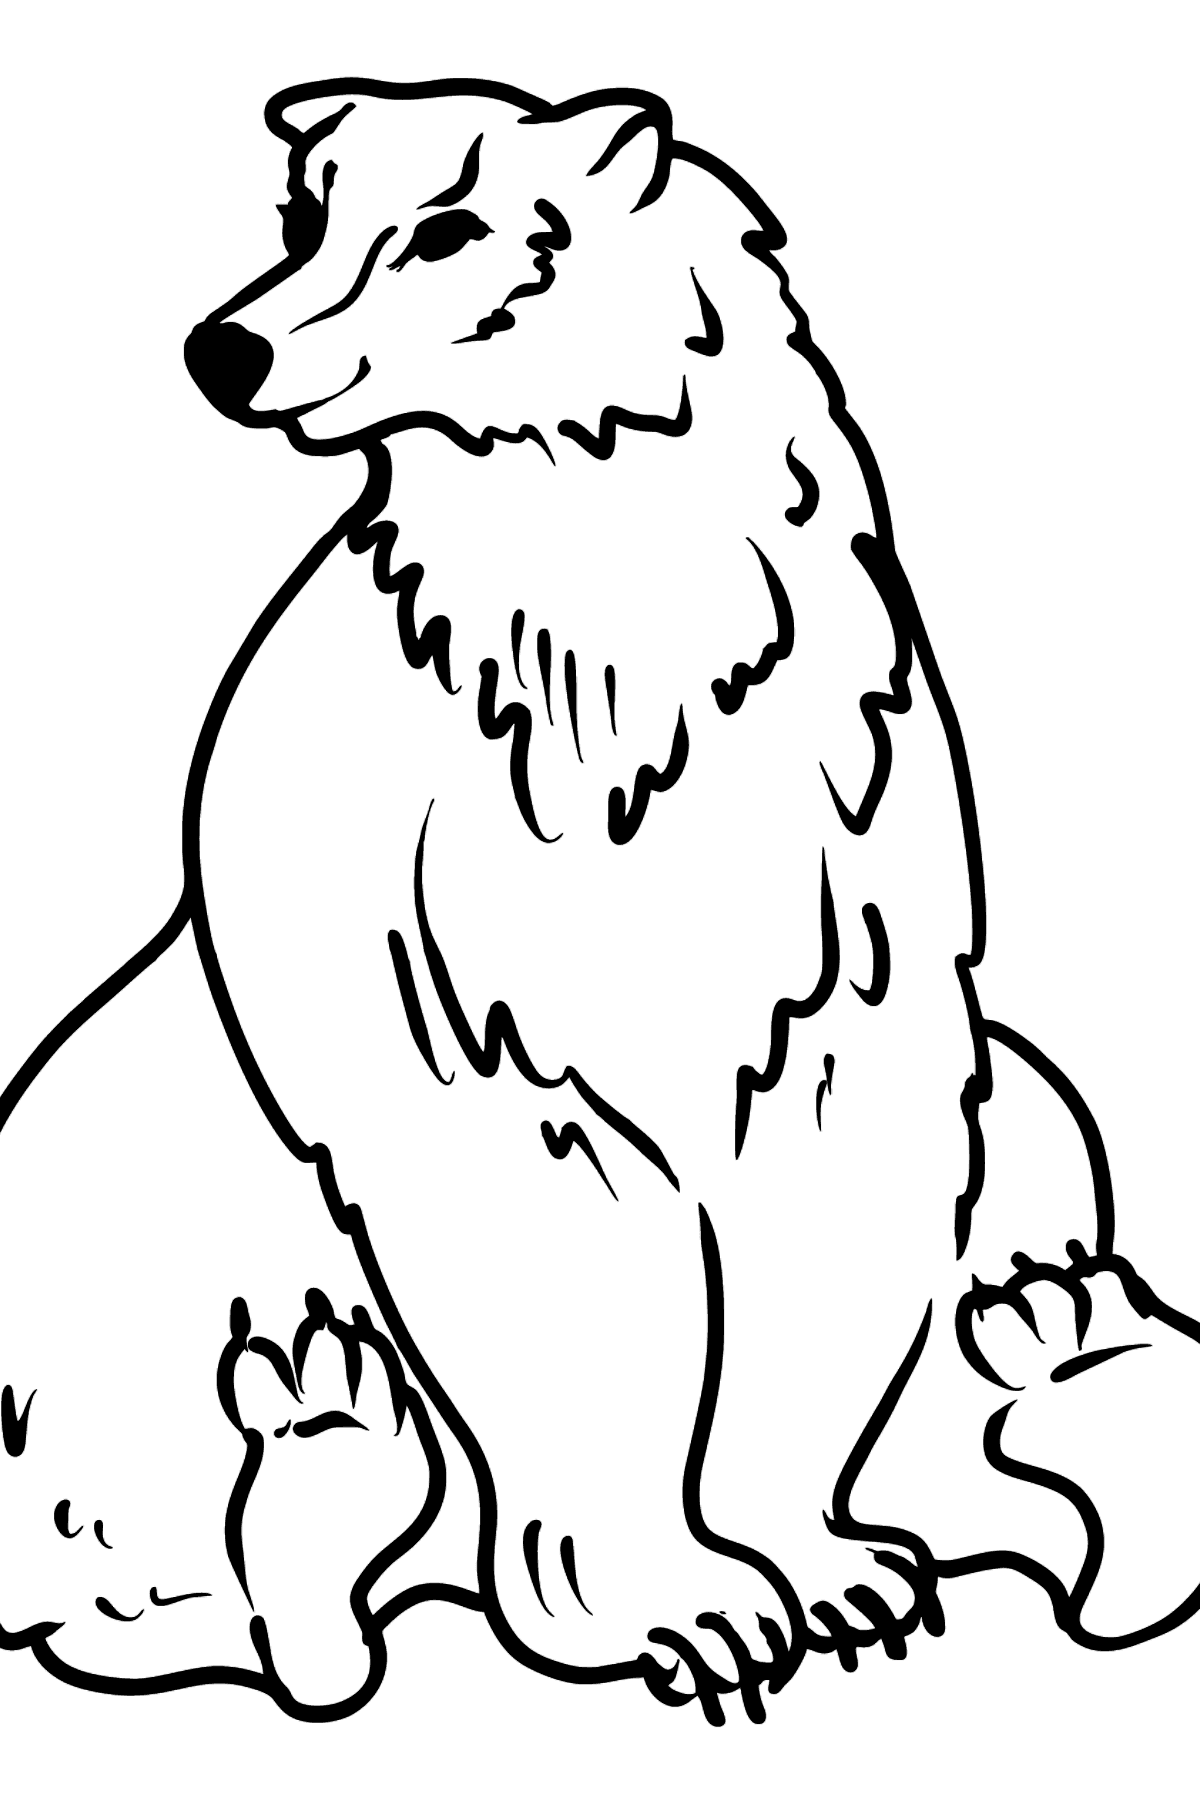 Bear coloring page - Coloring Pages for Kids